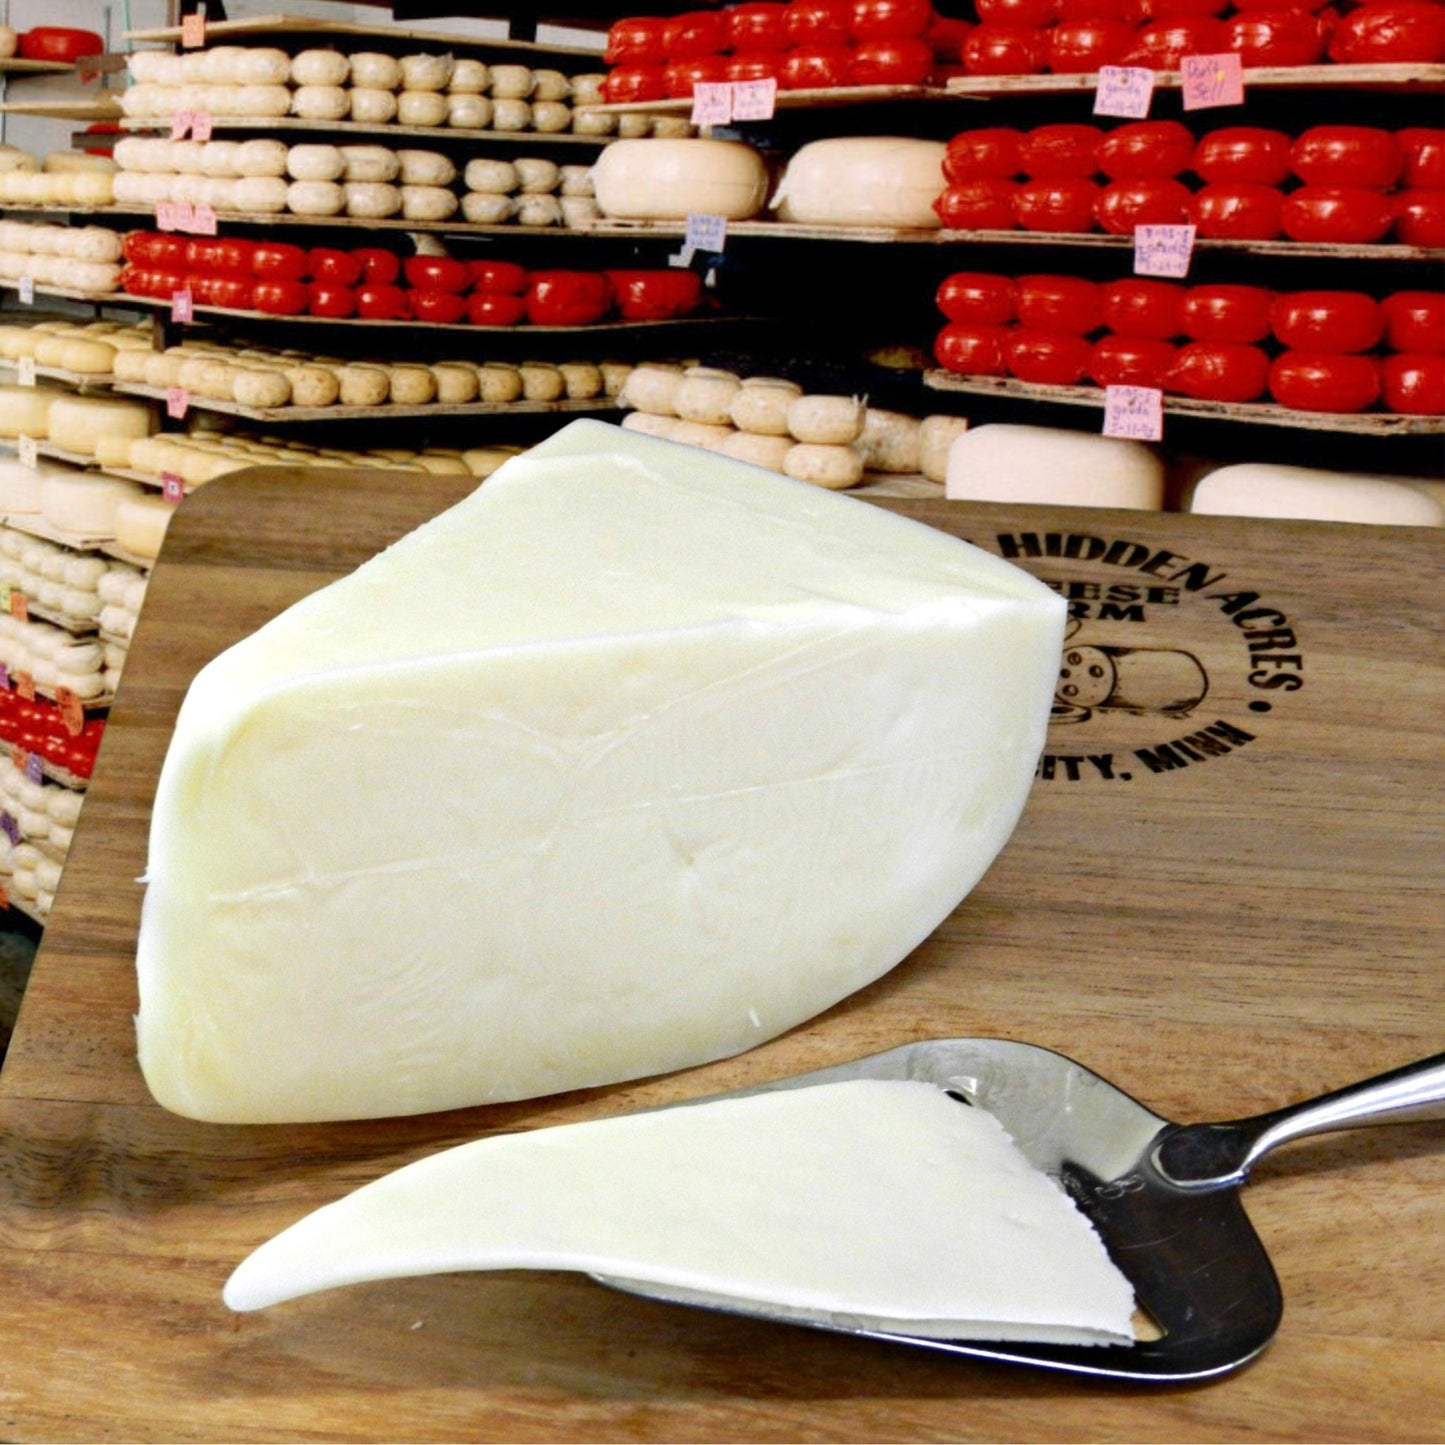 Eichtens Tilsit Cheese - Eichtens Cheeses, Gifts & FoodsAll Products